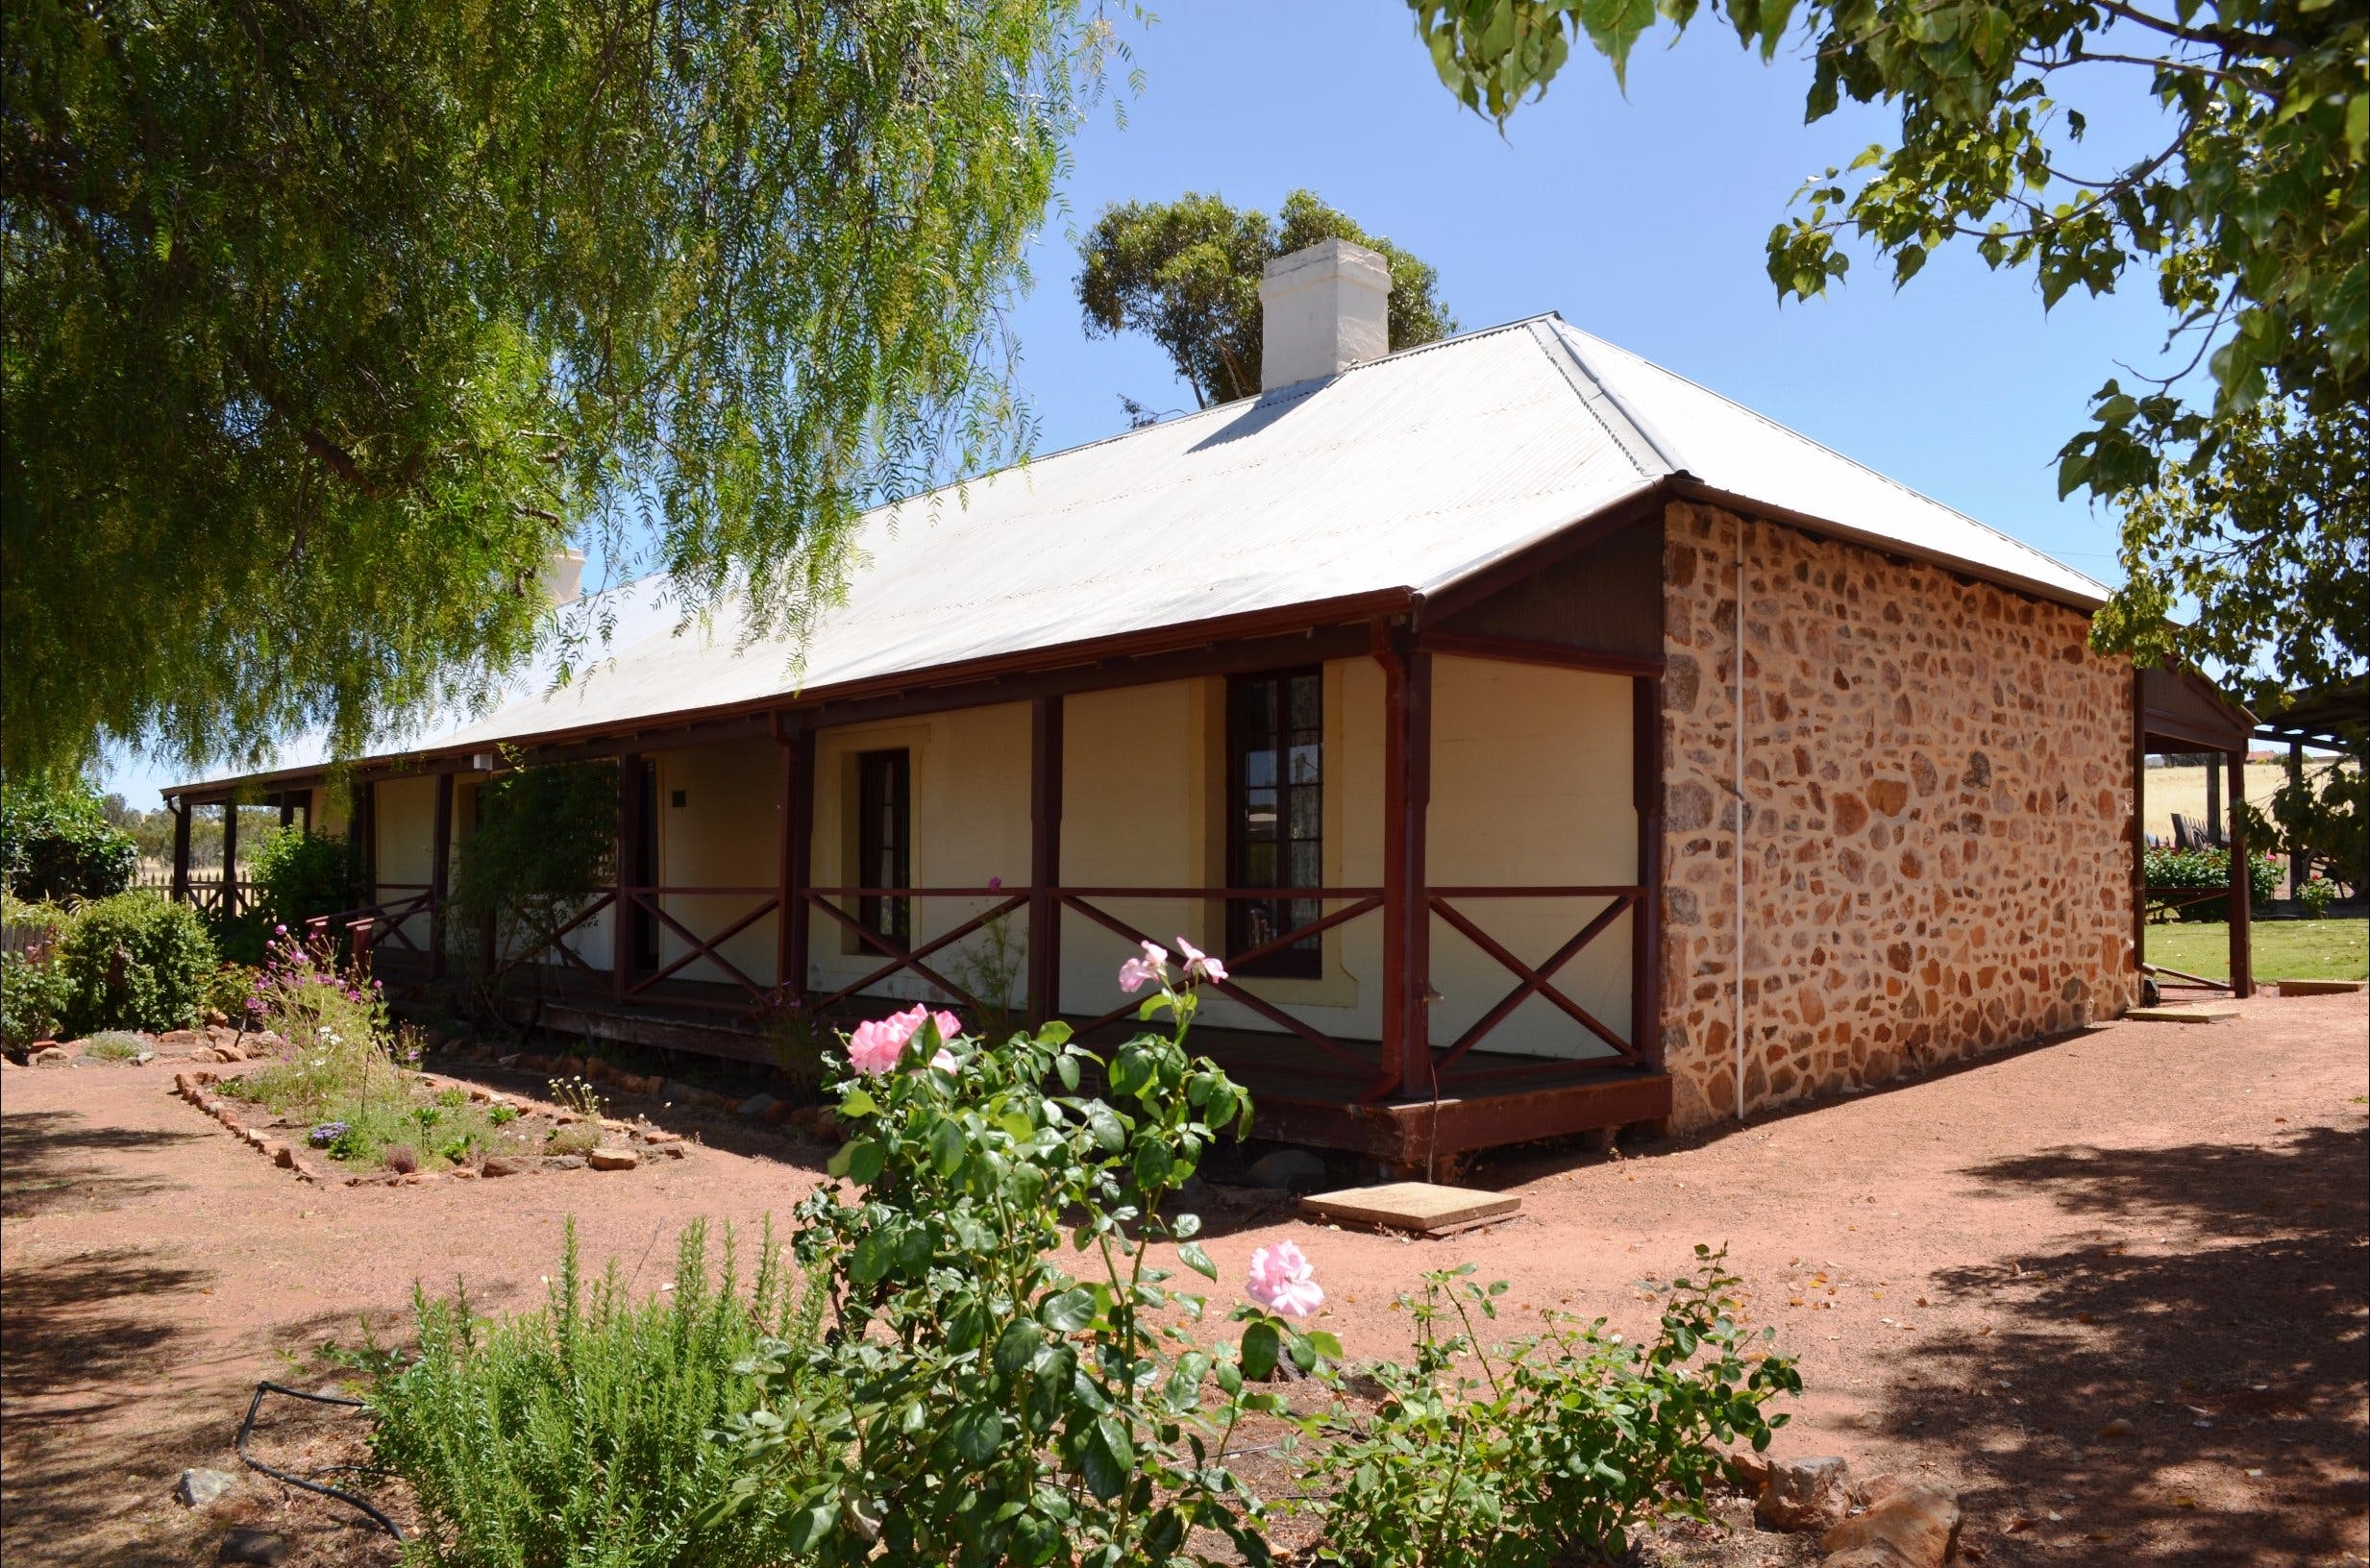 Morby Cottage - Attractions